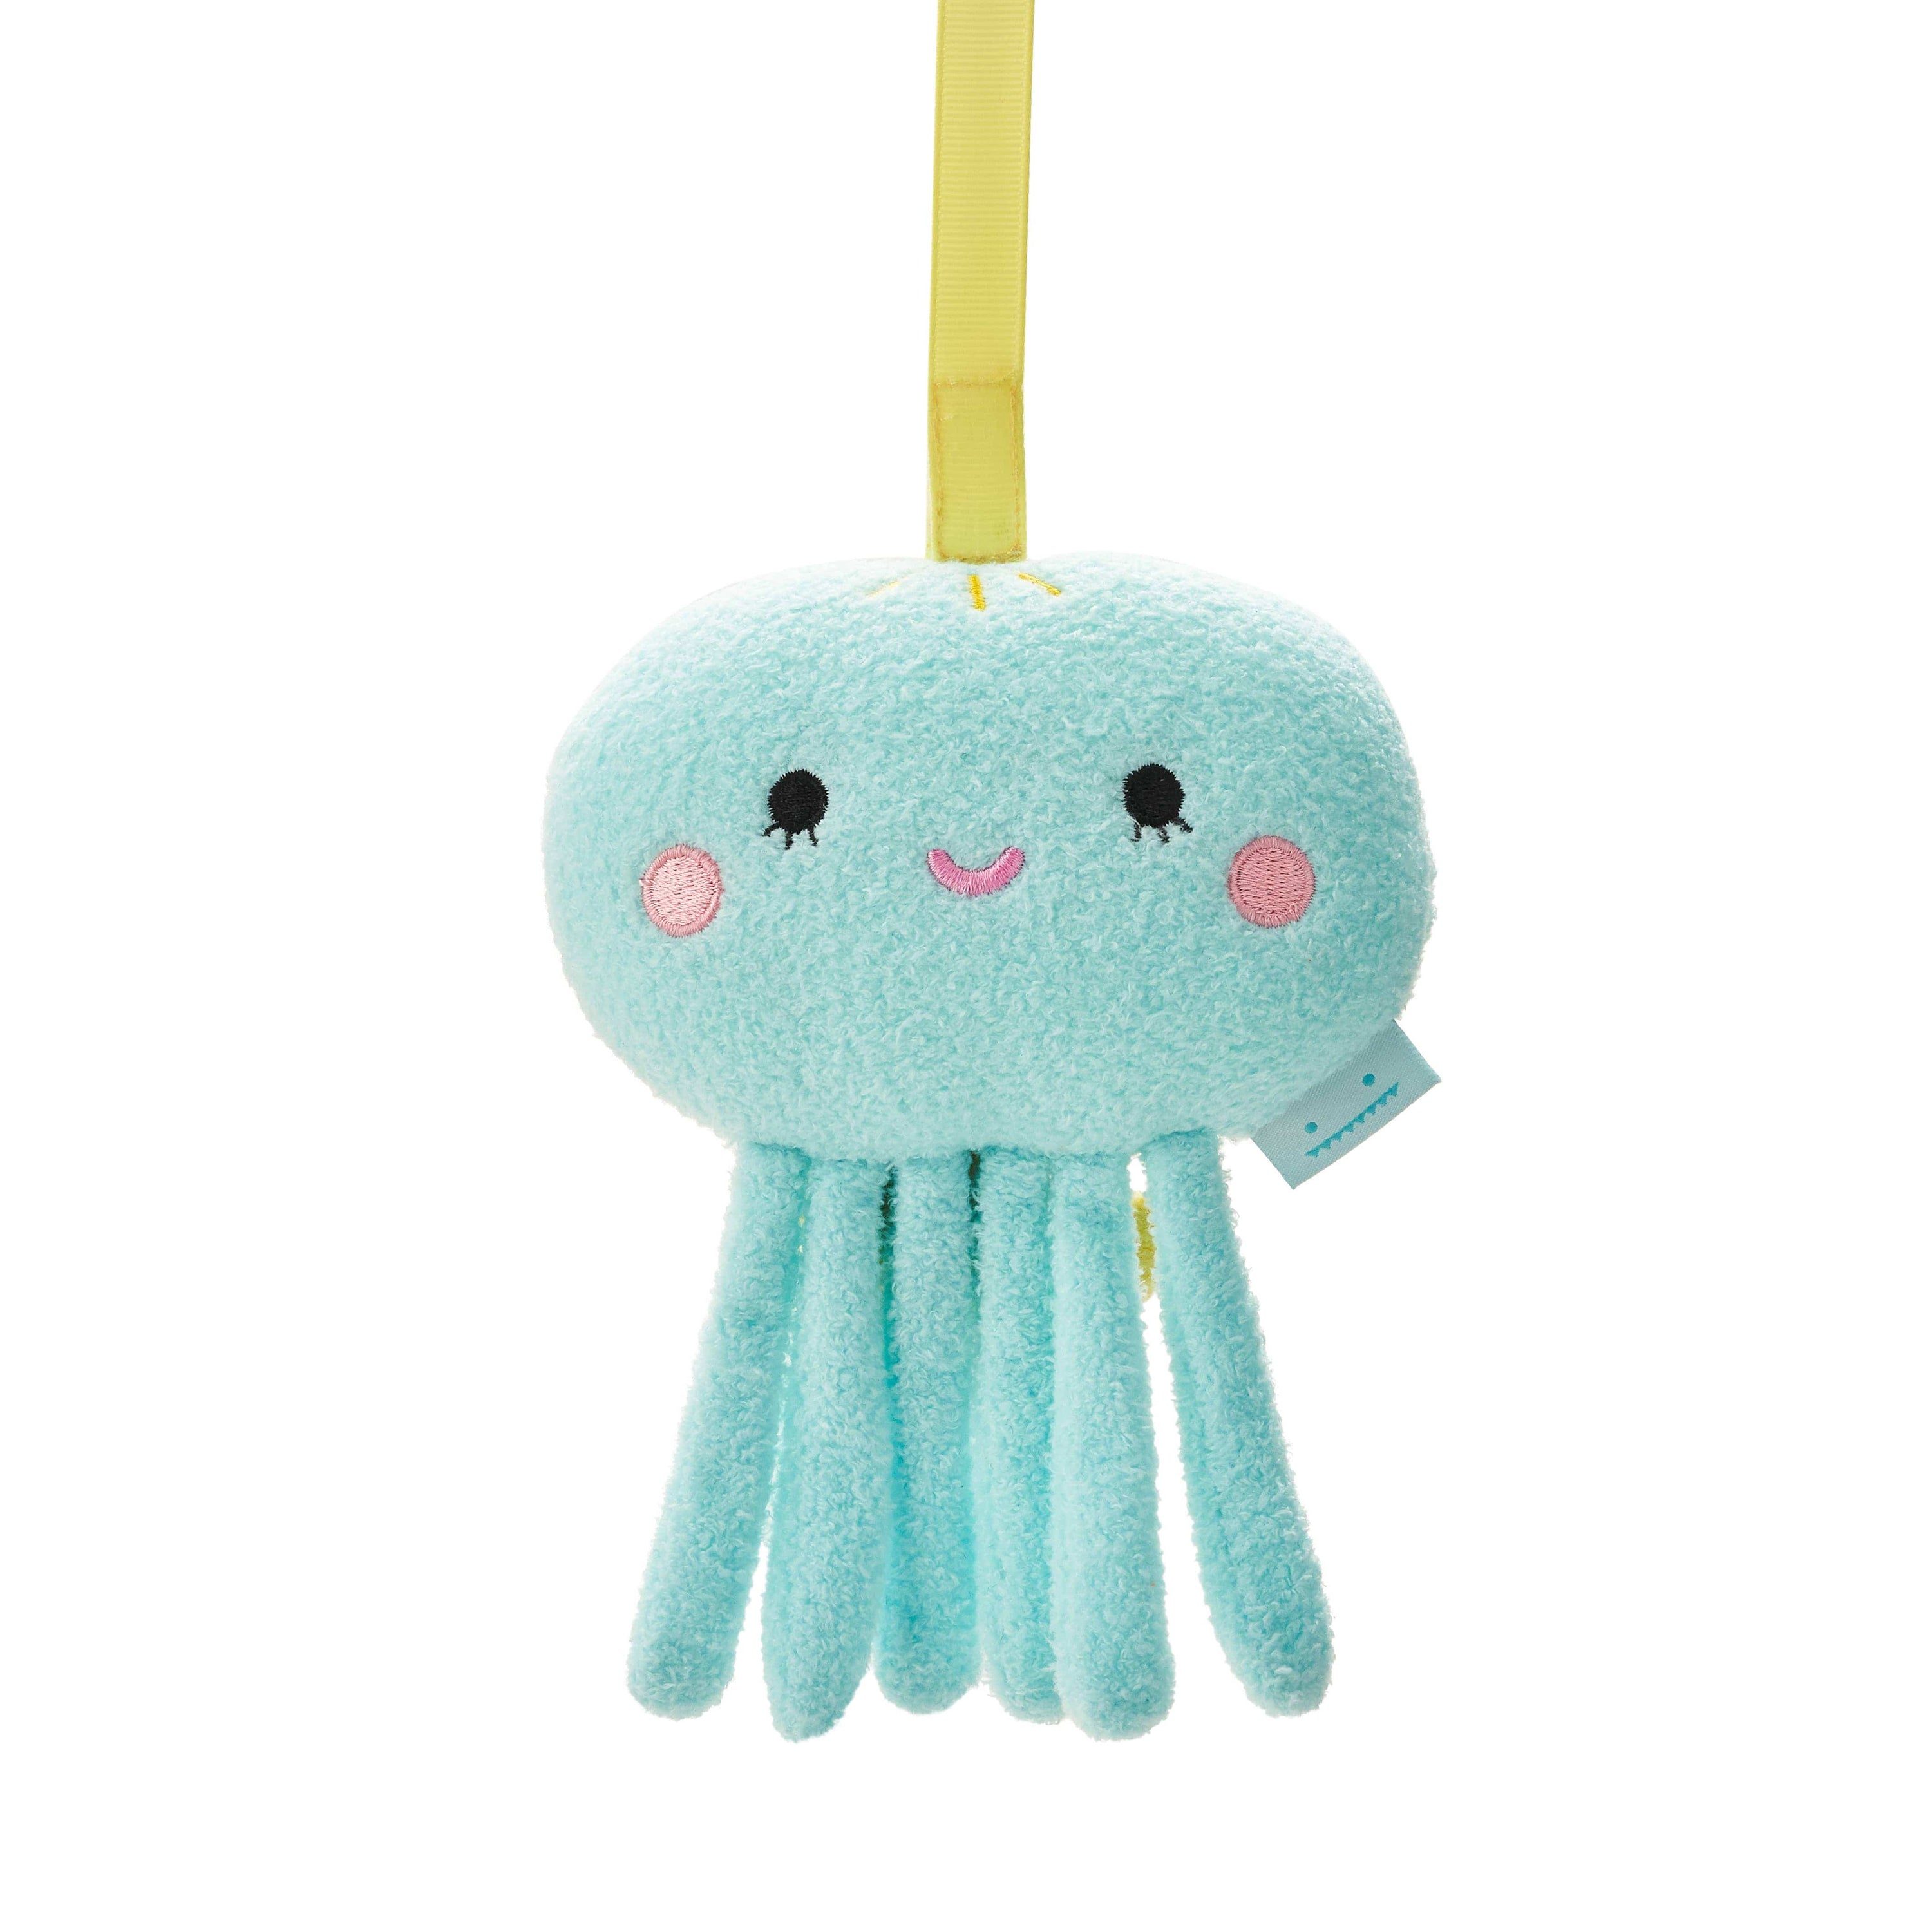 Noodoll Music Mobile - Ricejelly Jellyfish Kawaii Gifts 5033435996896